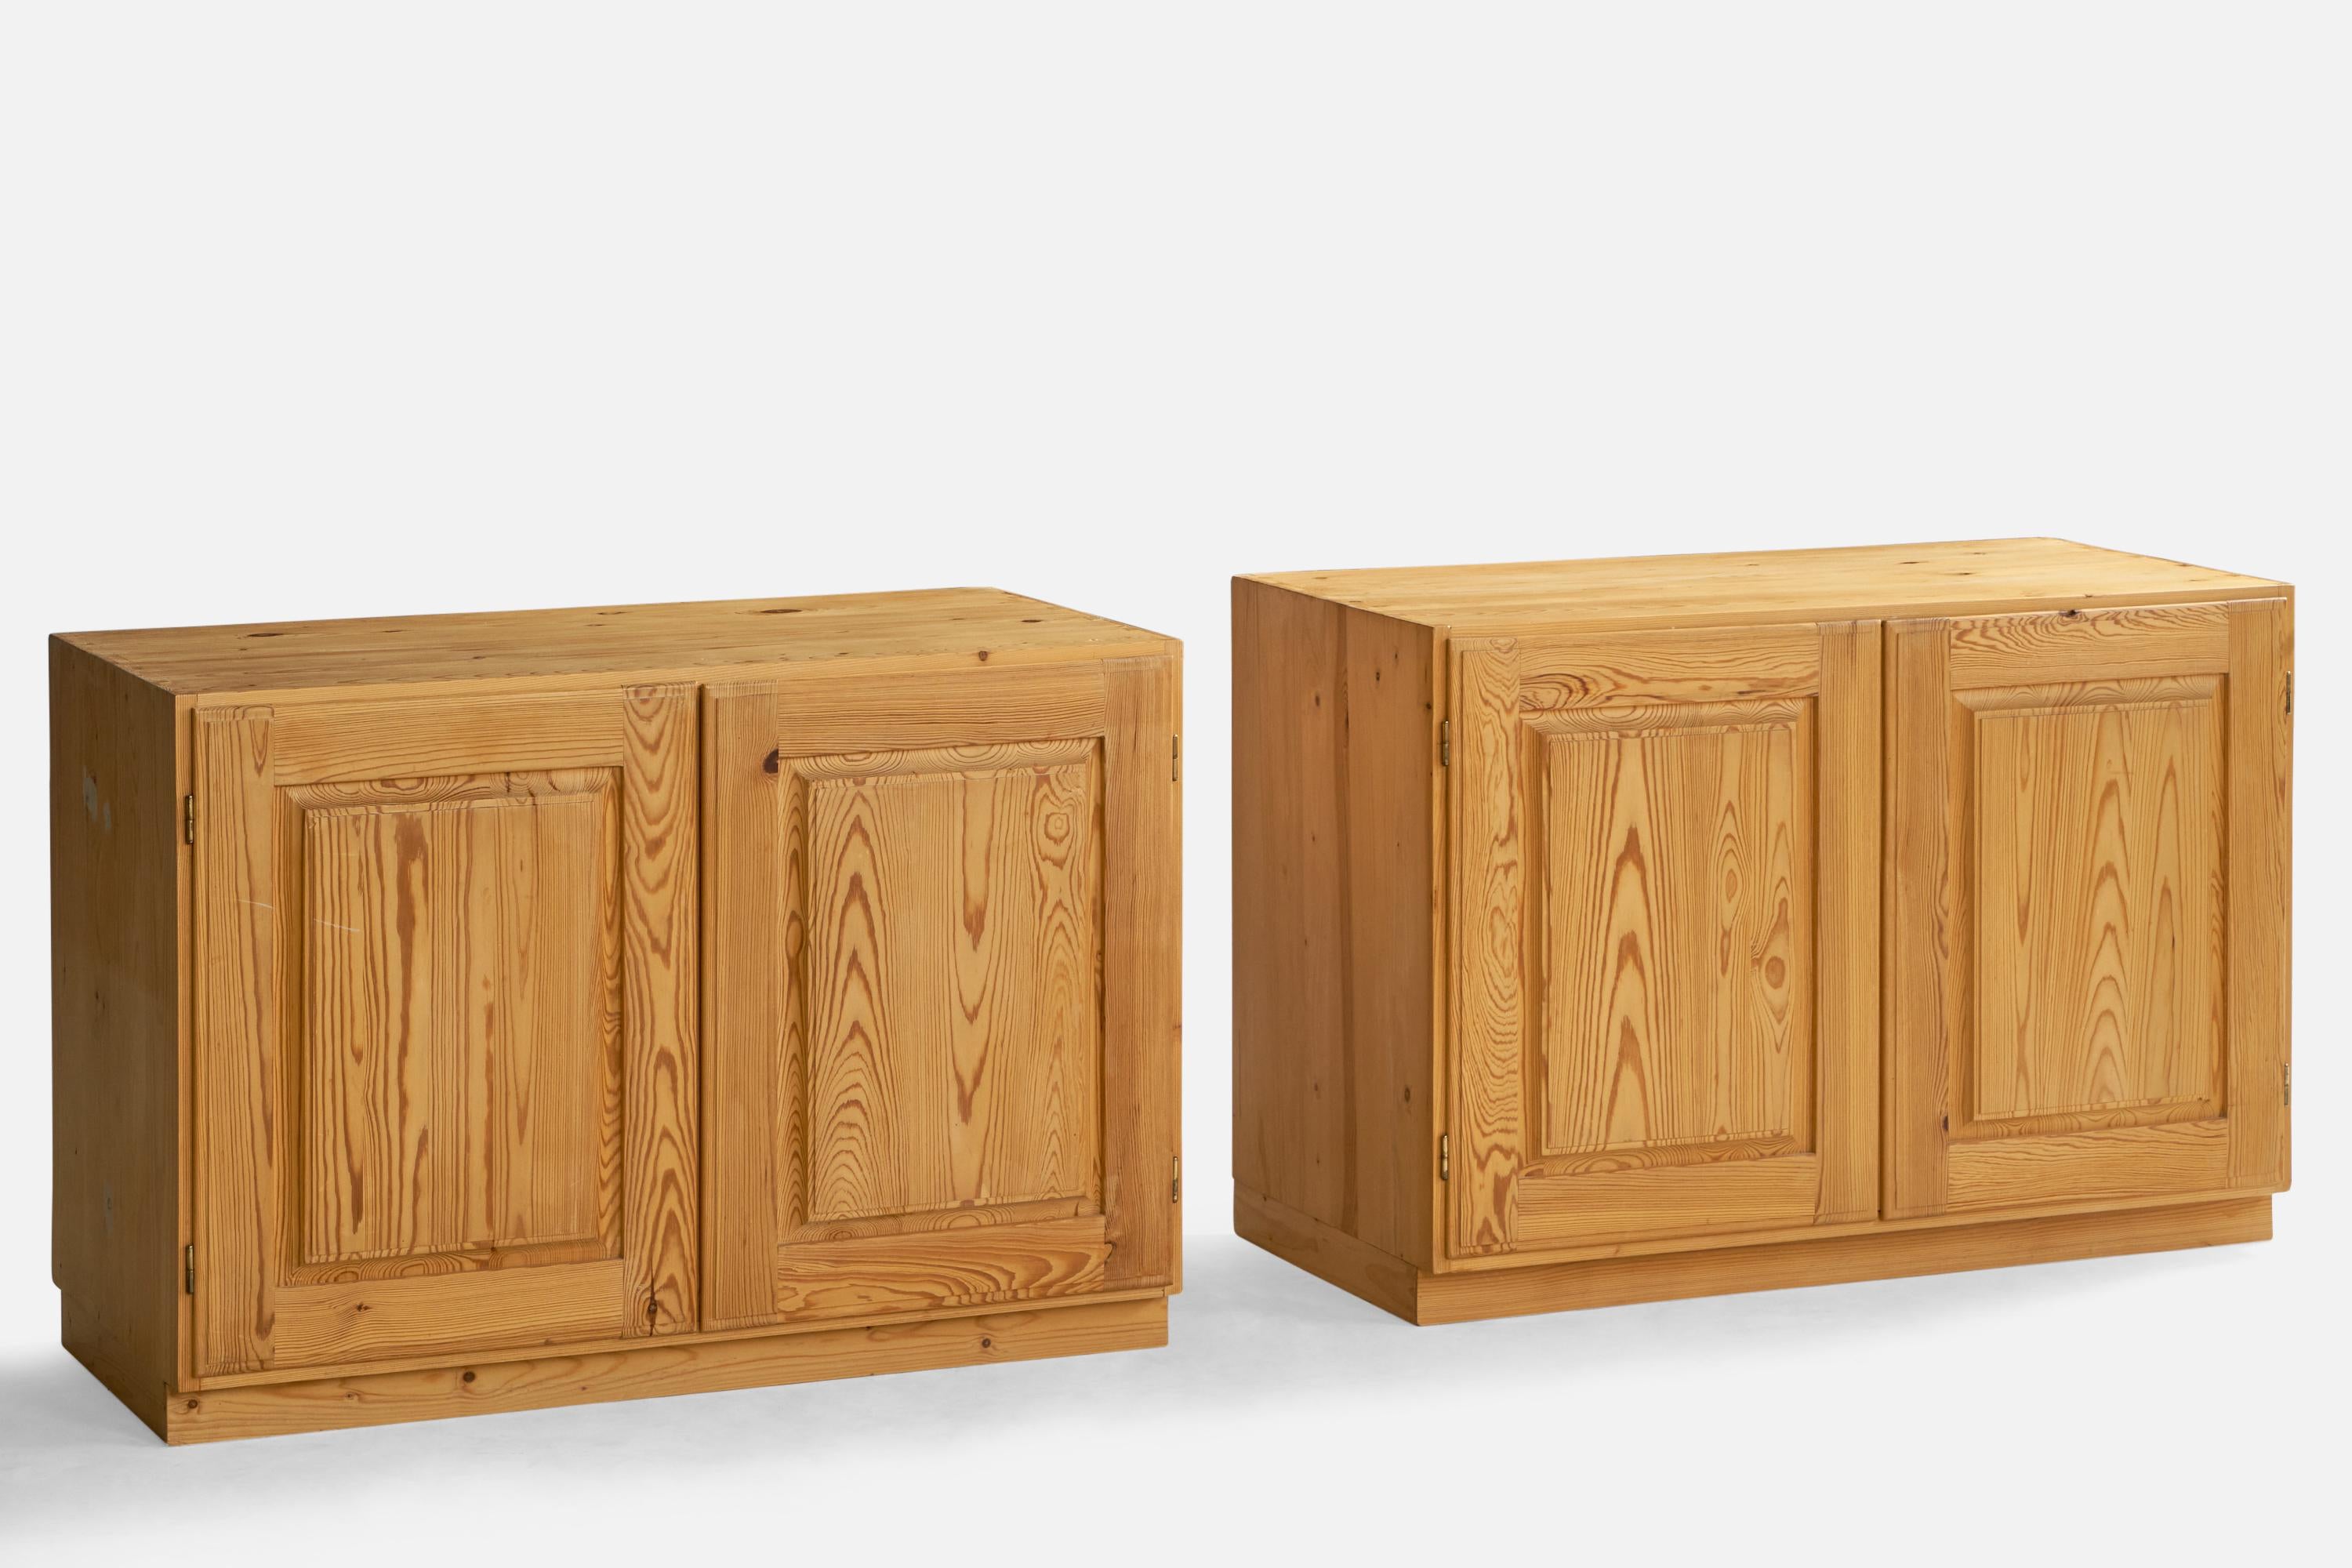 A pair of pine cabinets designed and produced in Sweden, 1960s.